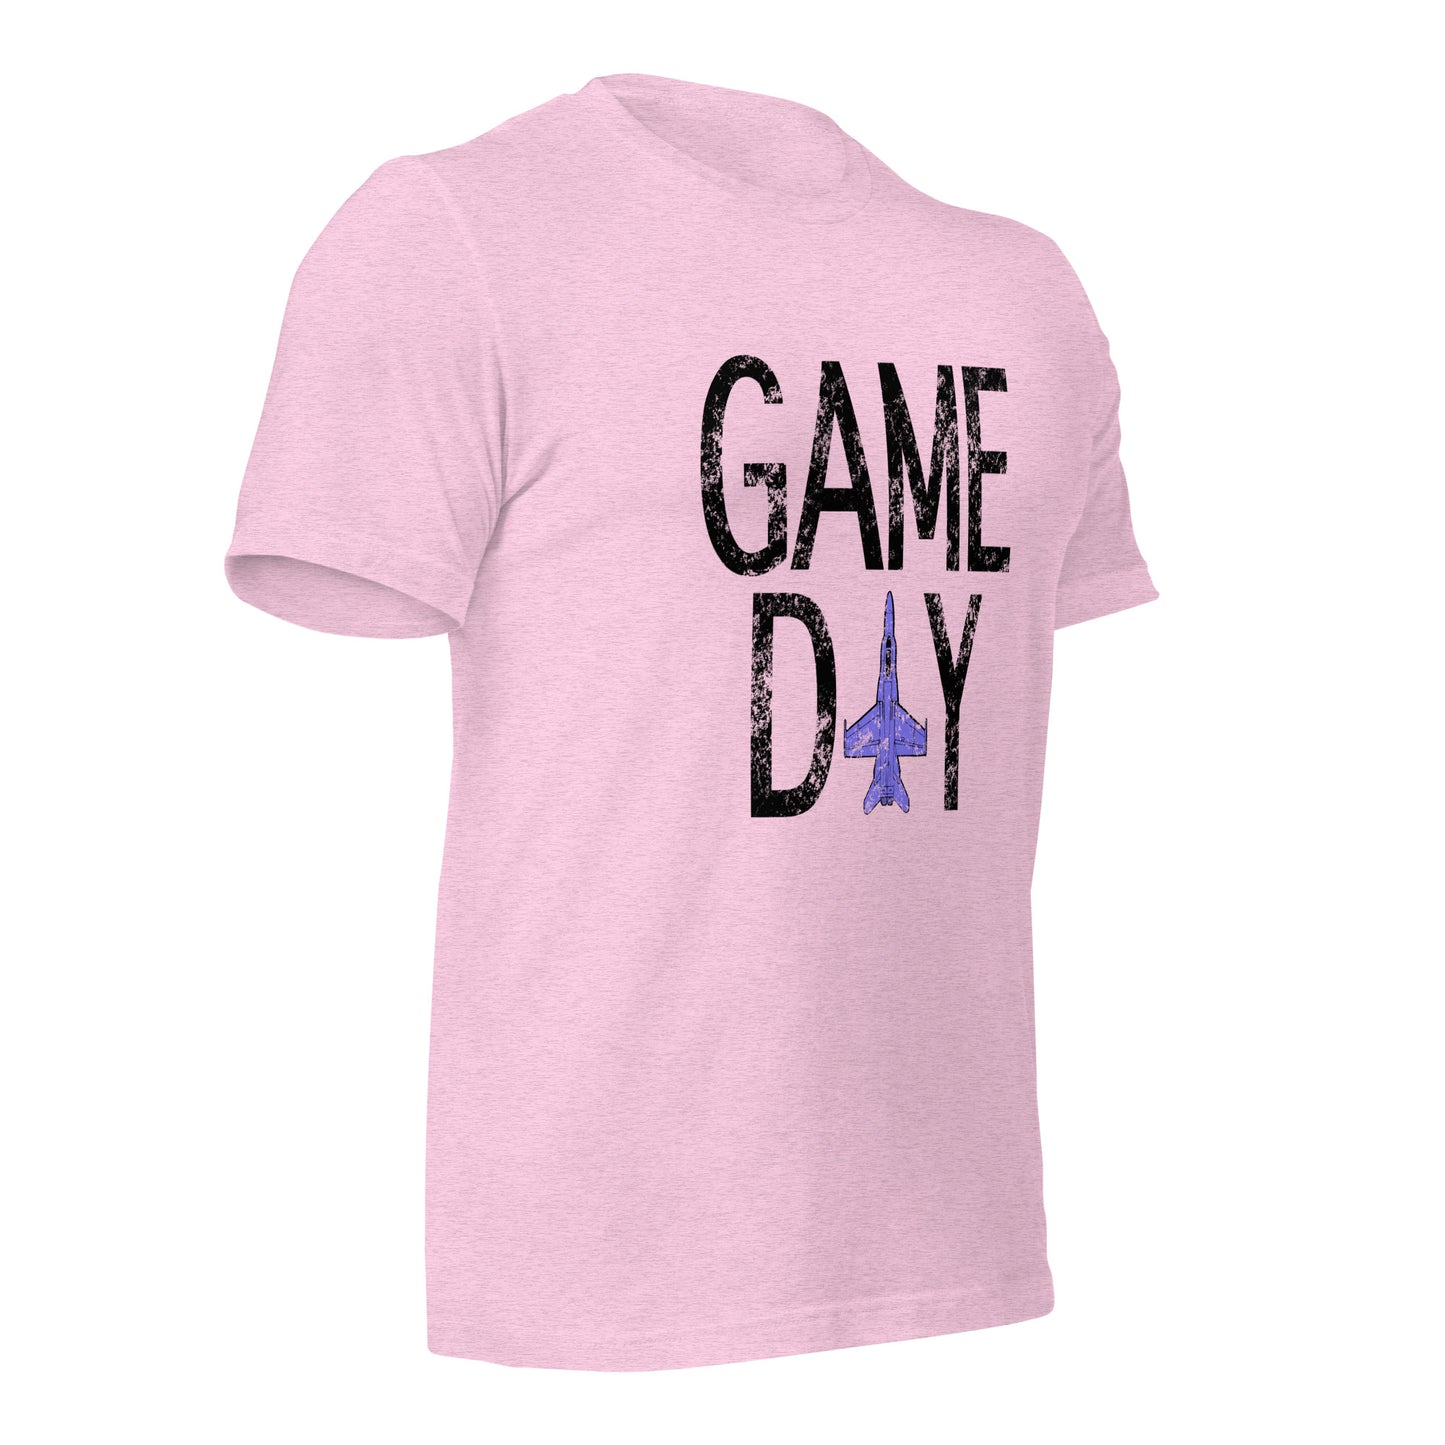 GAME DAY (Unisex t-shirt)